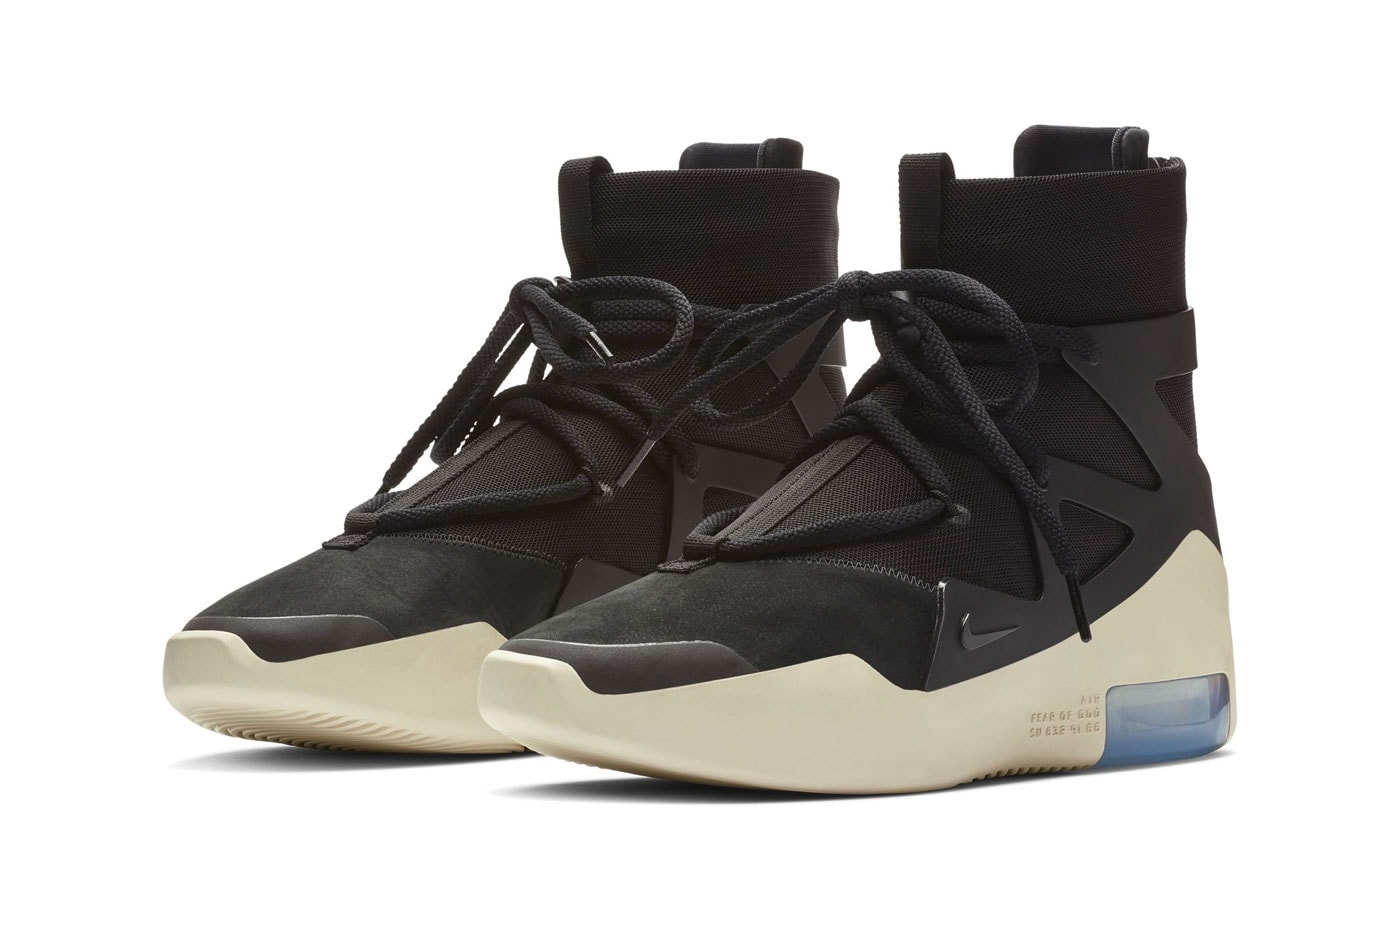 Nike Air Fear of God 1 "Black/black" Release Date official images info price canvas off white sole sneaker high top jerry lorenzo december 2018